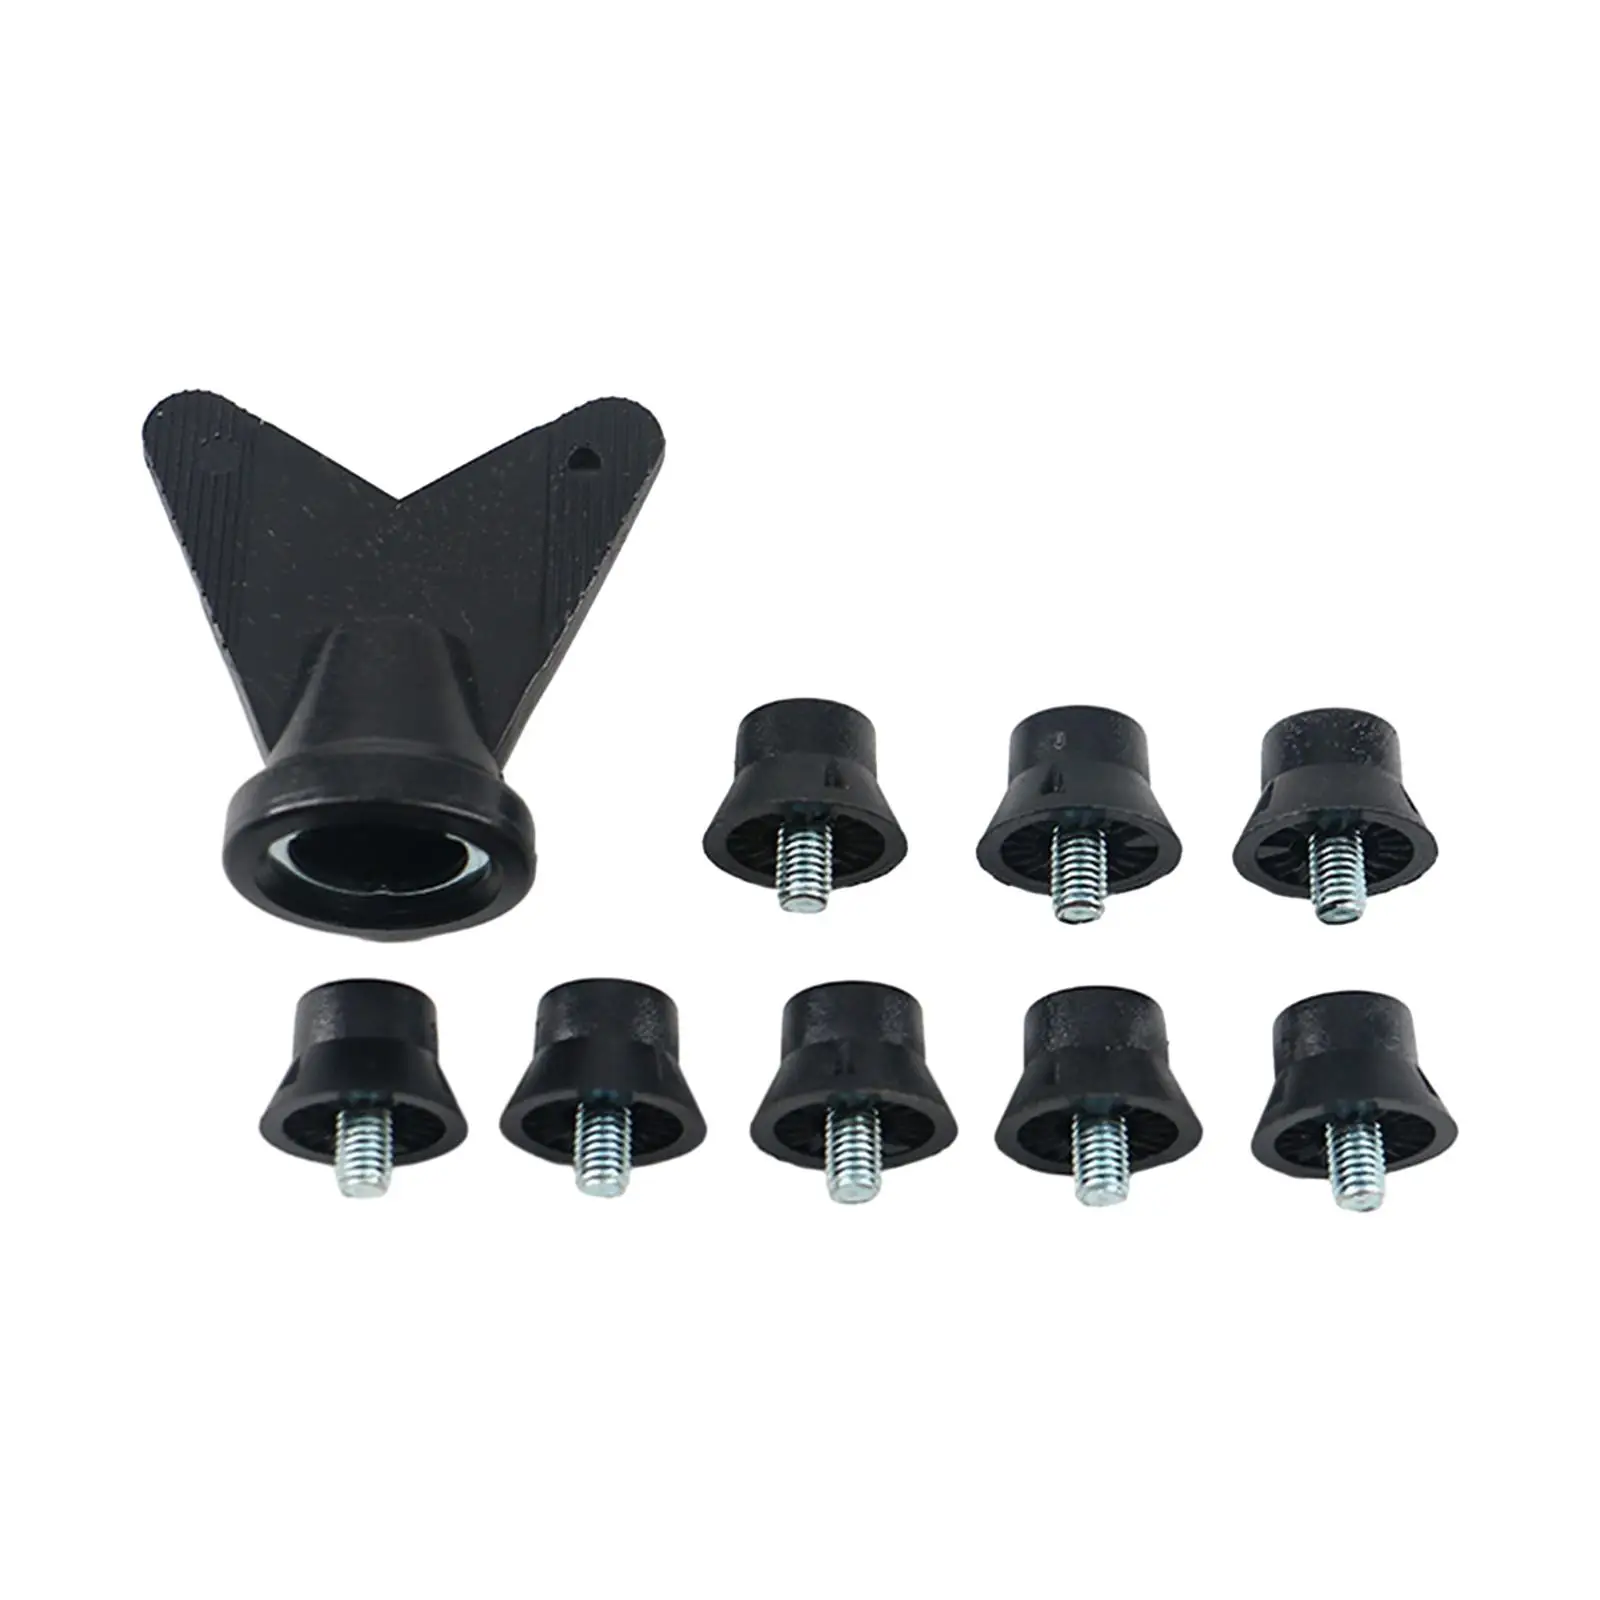 12x Rugby Shoes Studs Non Slip Thread Screw 5mm Dia Universal Soccer Boot Cleats Football Boot Spikes for Training Competition